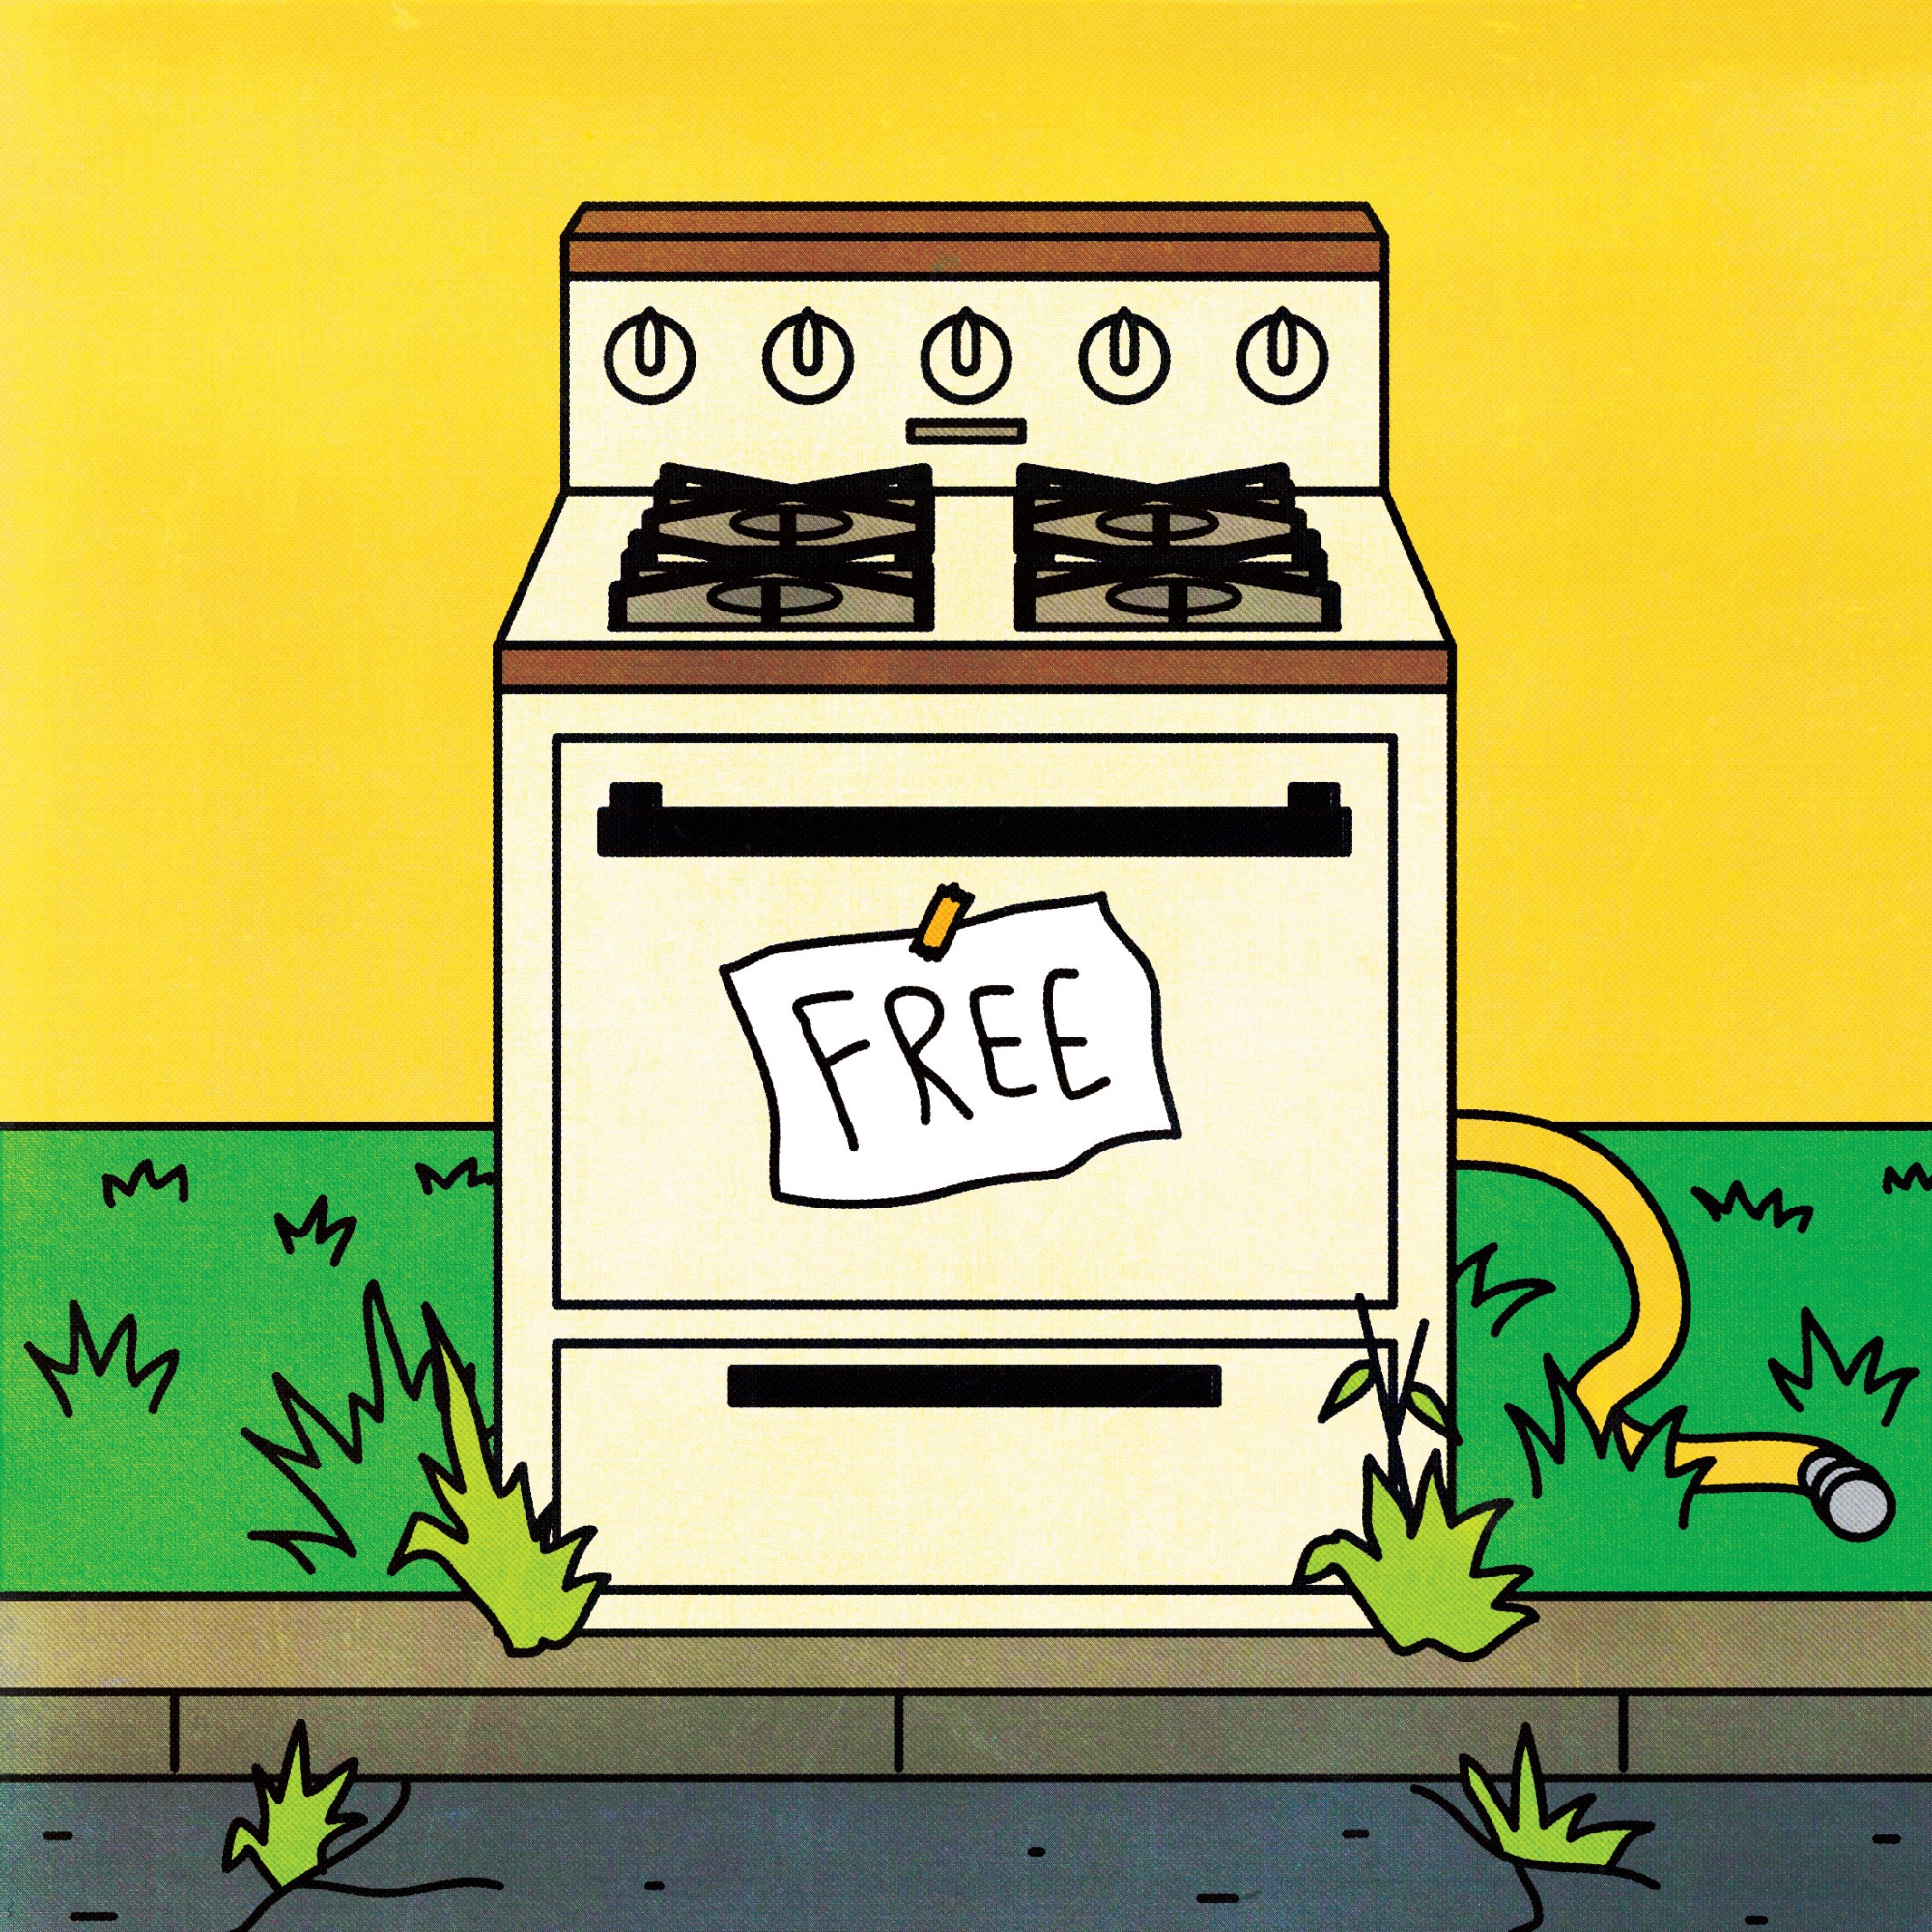 7 Energy-Efficient Alternatives to Your Oven or Stove